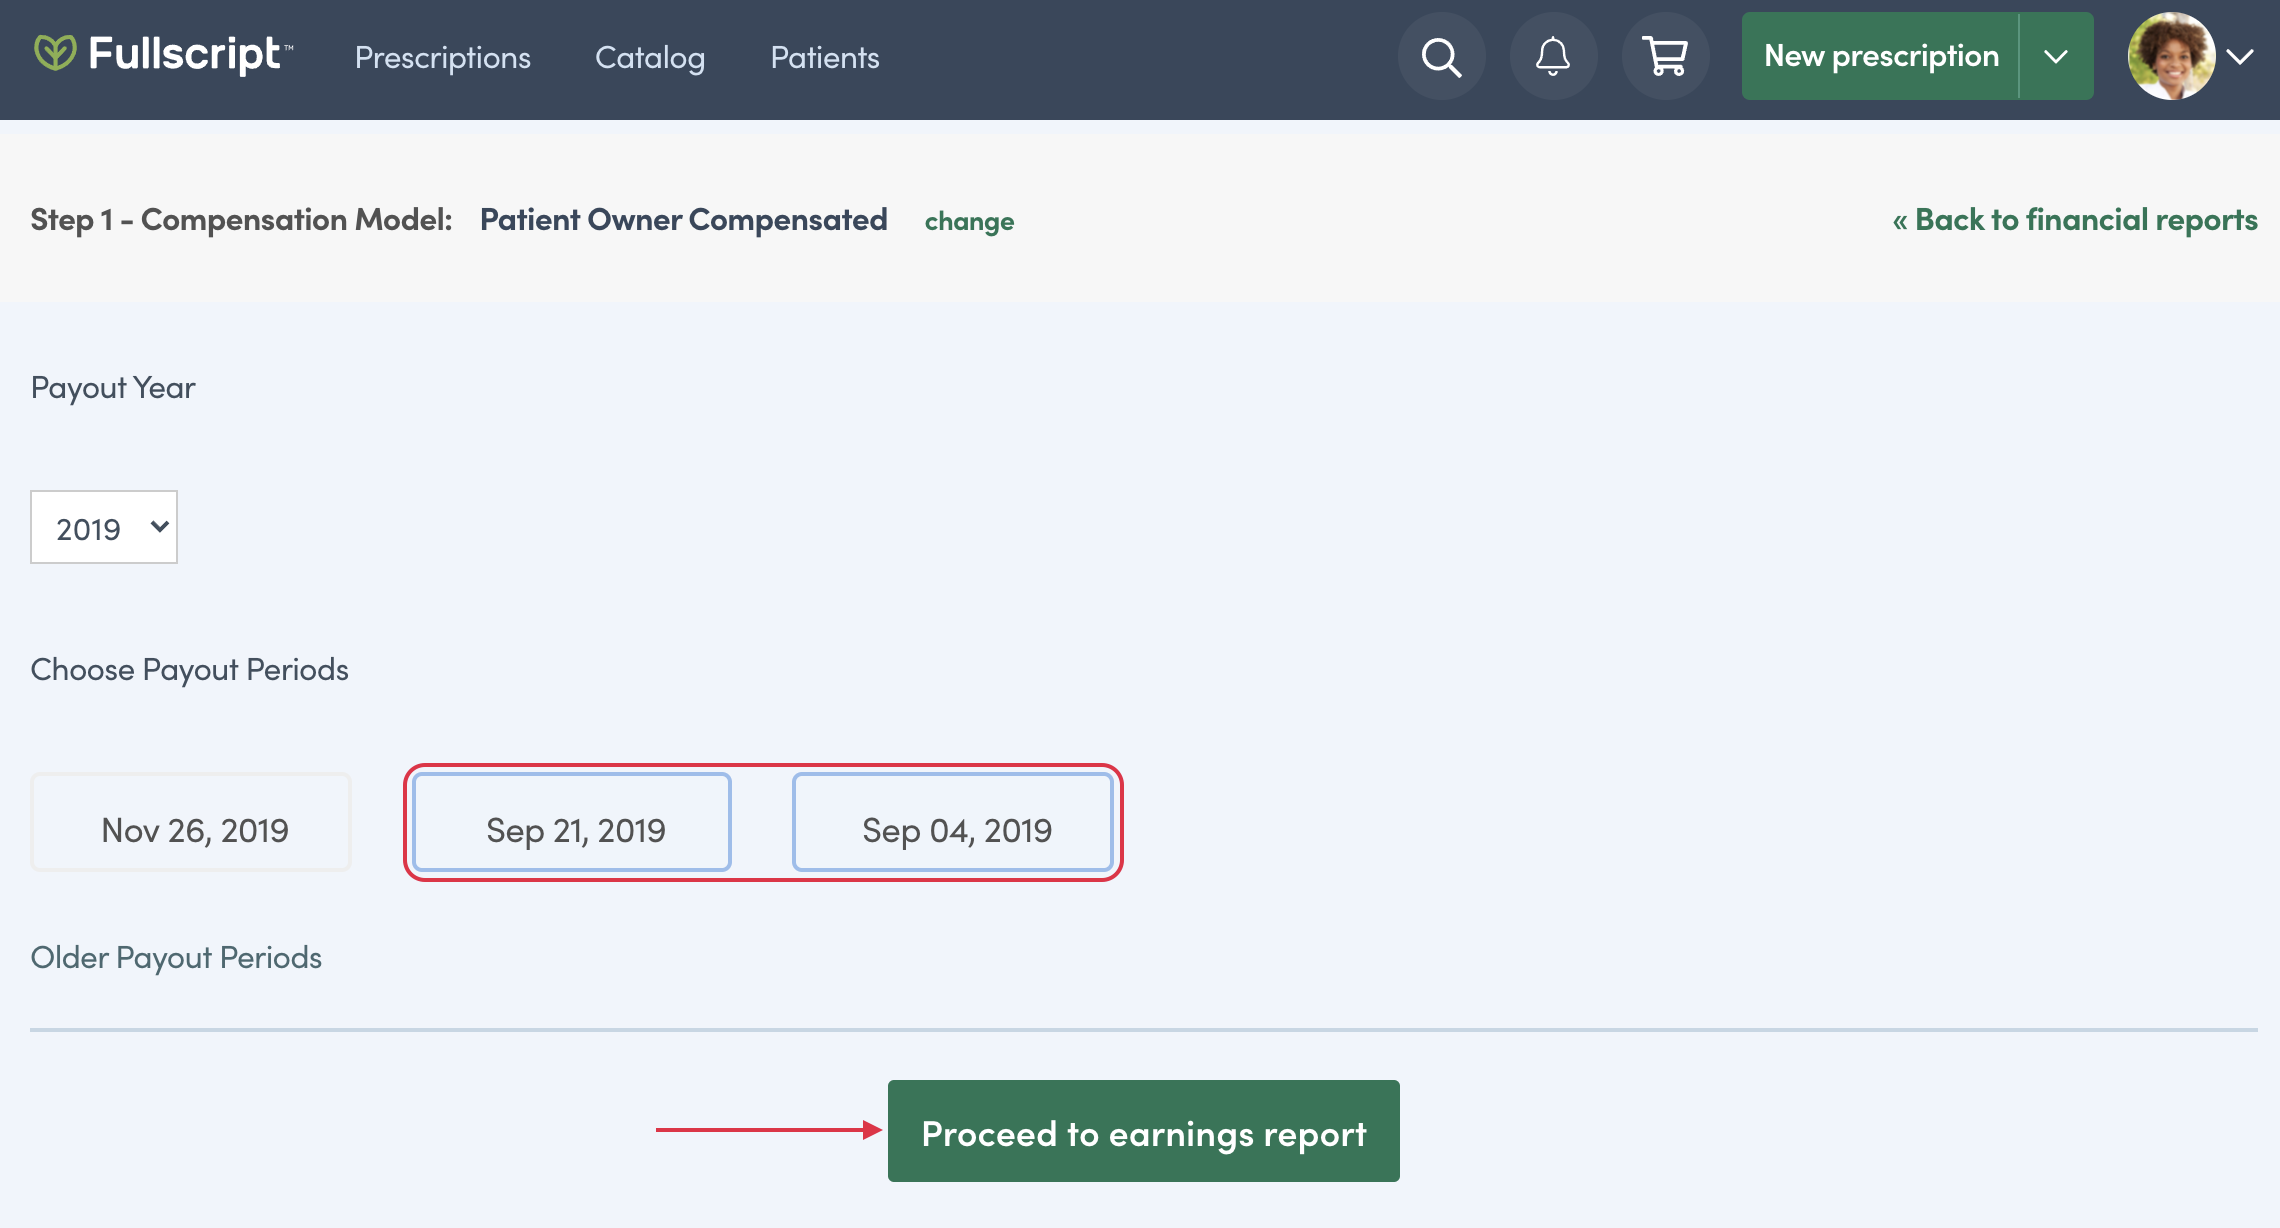 selecting payout dates date to include in the report, then select proceed to earnings report